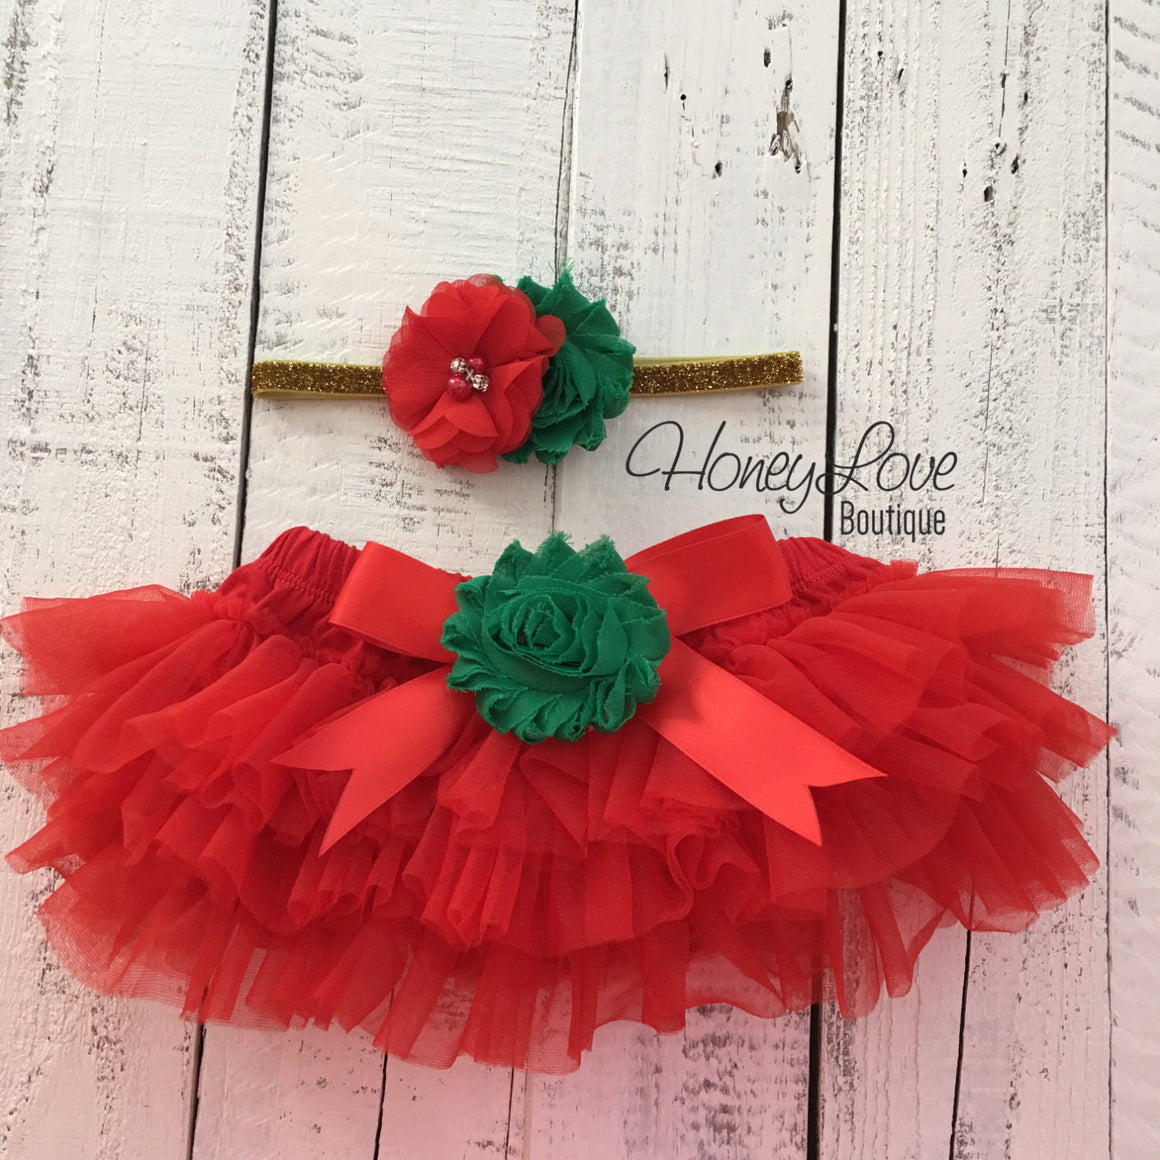 My 1st Christmas Outfit -  Gold/Silver -  Red, Green and Glitter - Embellished tutu skirt bloomers - HoneyLoveBoutique